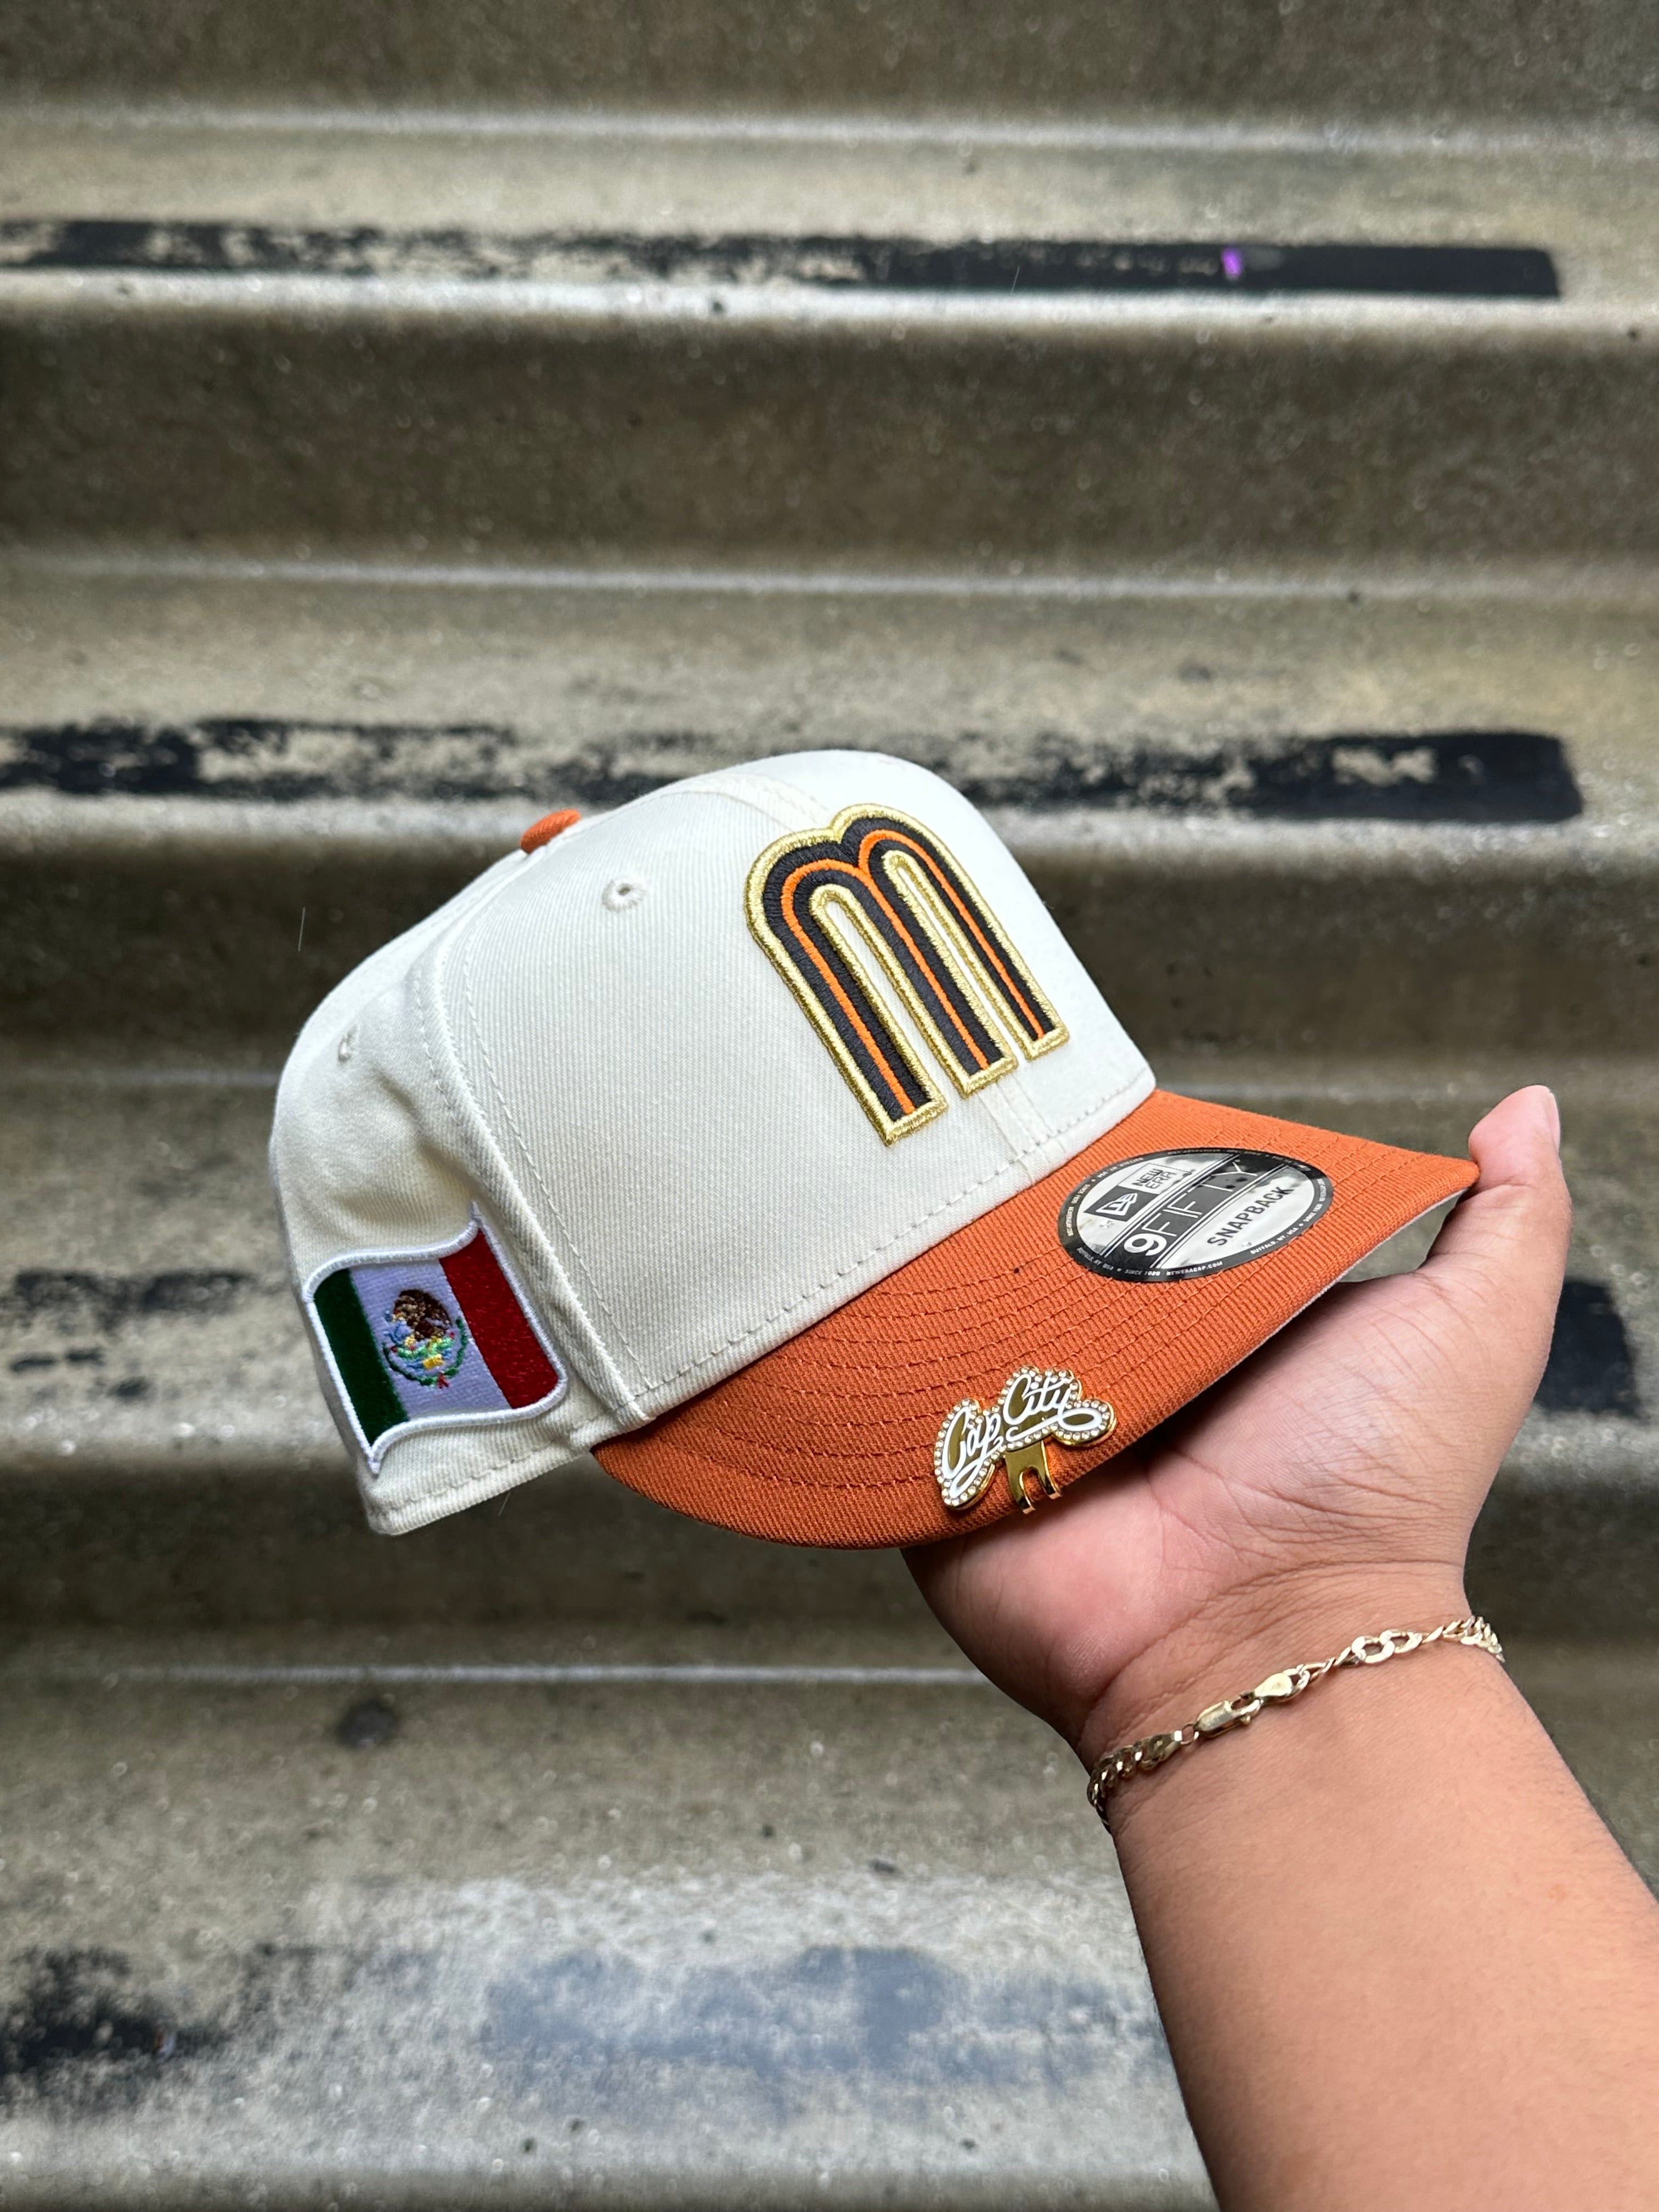 NEW ERA EXCLUSIVE 9FIFTY CHROME WHITE/RUST ORANGE SNAPBACK W/ MEXICO FLAG SIDE PATCH